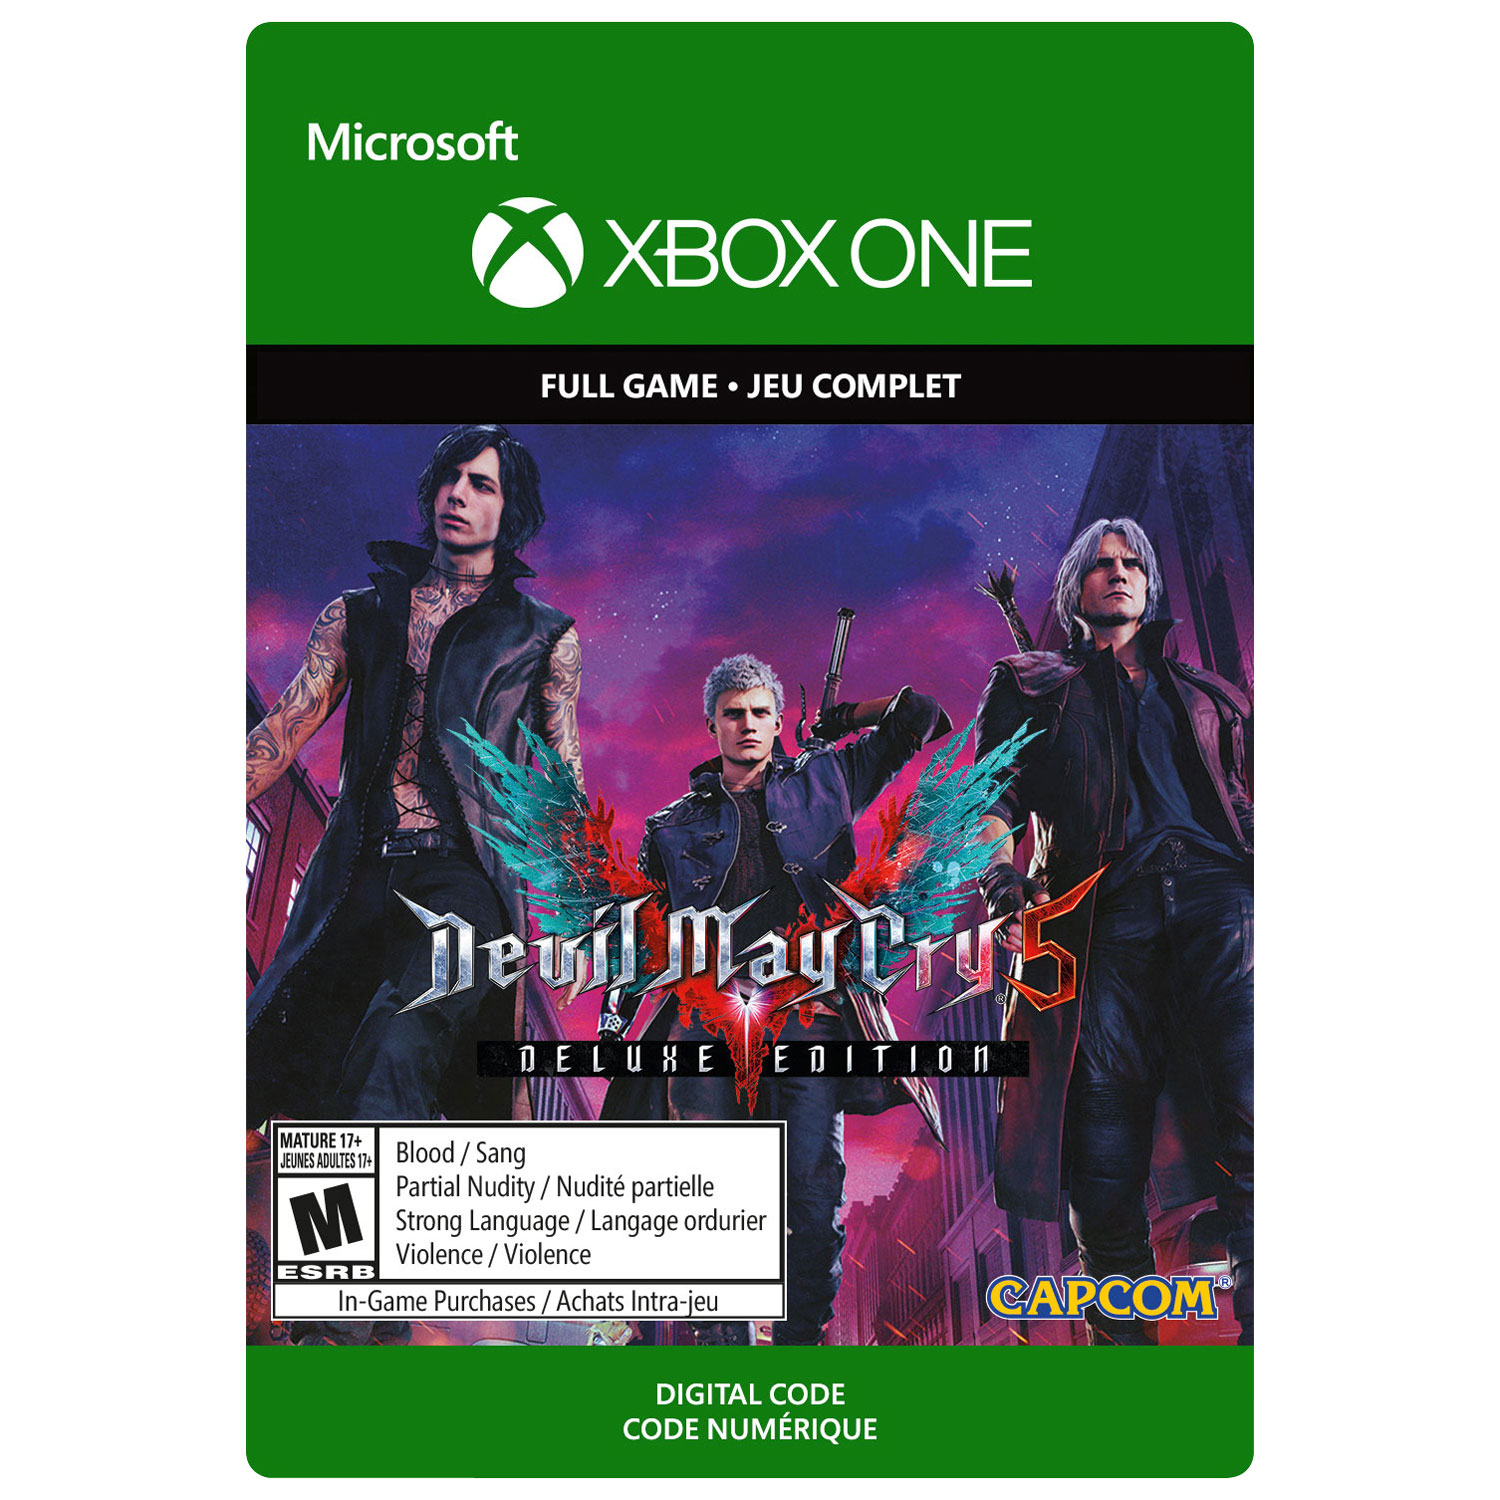 Devil May Cry 5 Deluxe Edition (Xbox One) - Digital Download